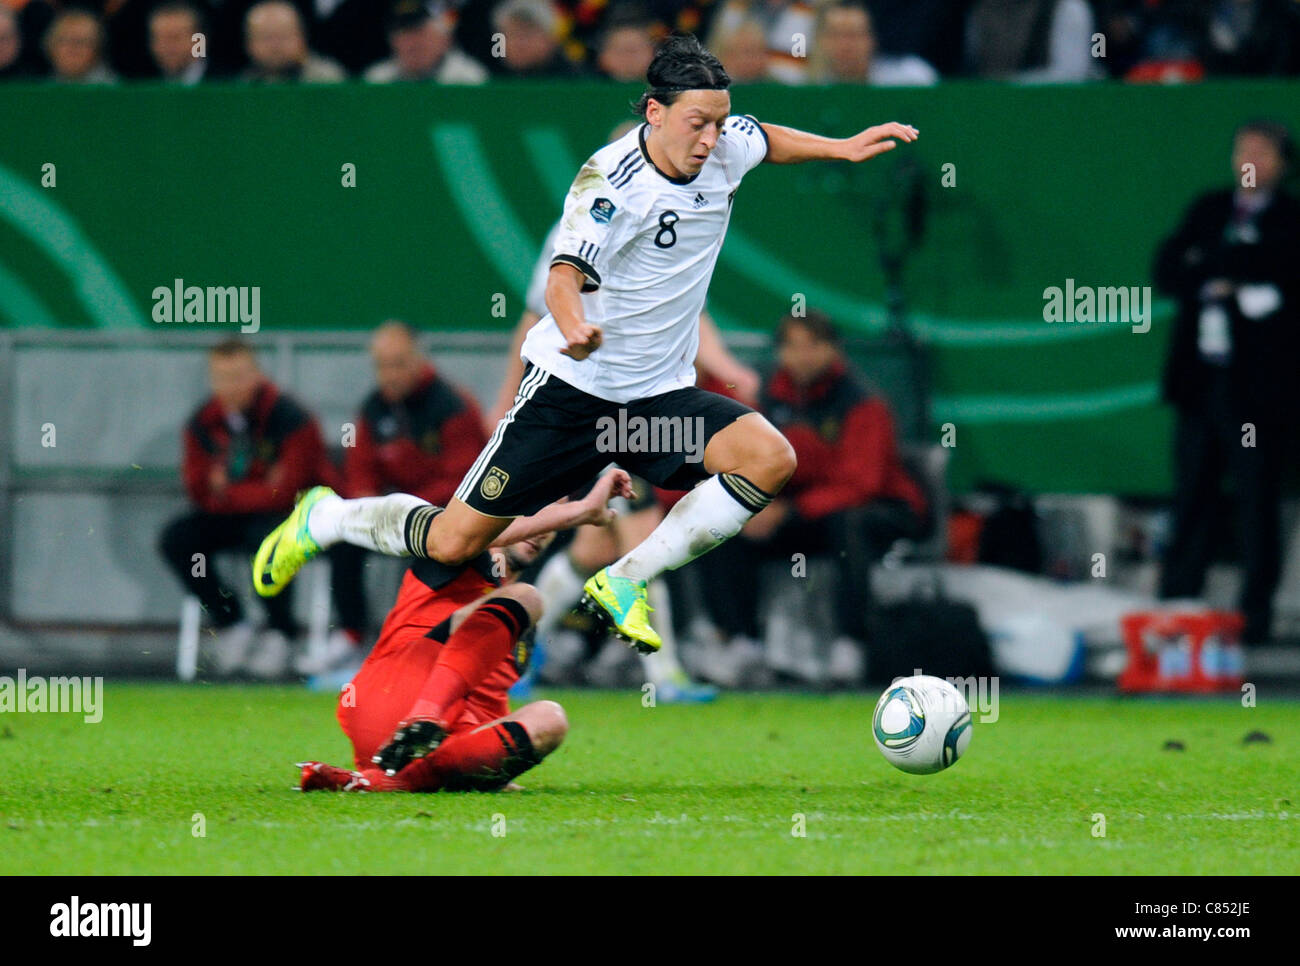 Qualification match for the European Football Championship in Poland and Ukraine 2012; Germany vs Belgium 3:1, at the Esprit Arena in Duesseldorf, Germany: Mesut Özil, Oezil (Germany, Real Madrid). Stock Photo